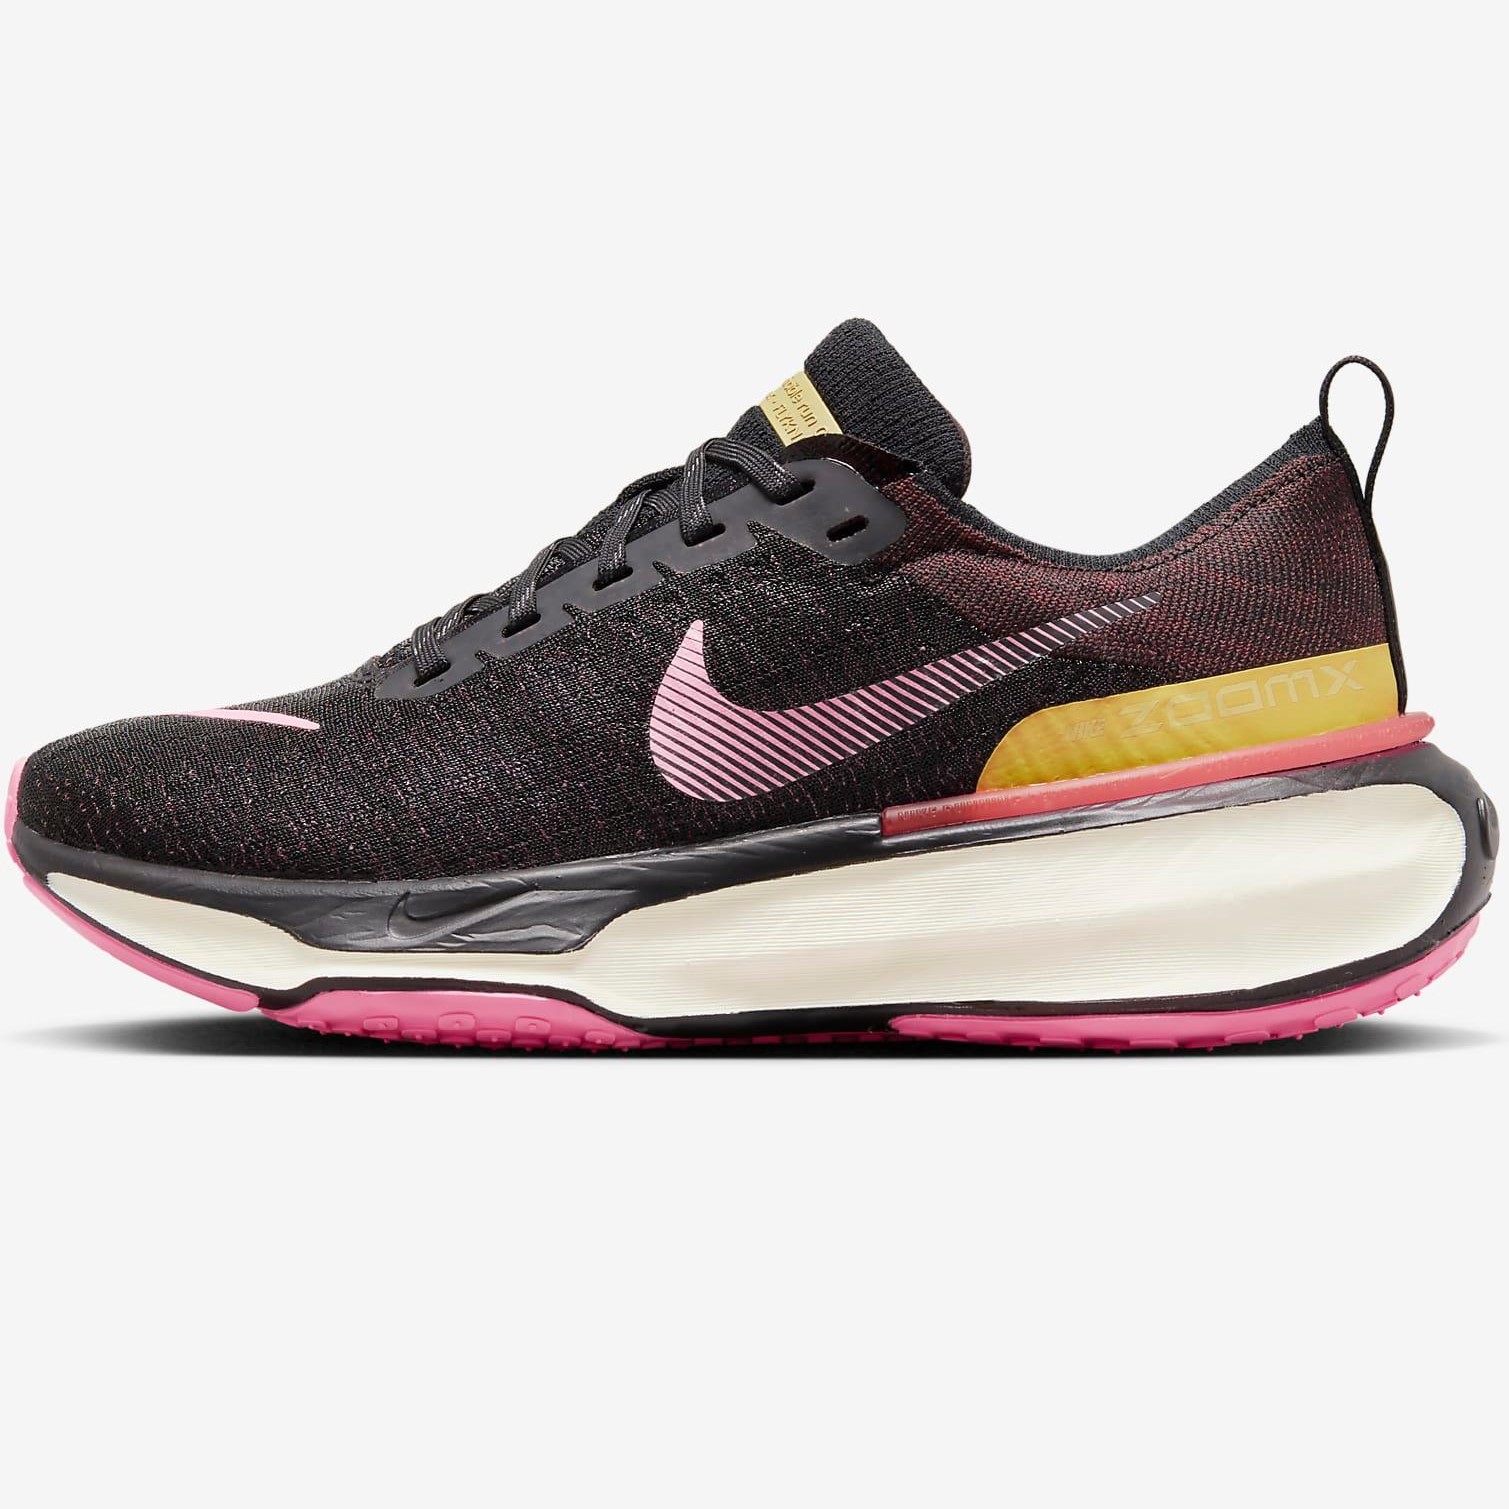 GIÀY THỂ THAO NỮ NIKE WOMENS ZOOMX INVINCIBLE RUN FLYKNIT 3 DR2660-200 15